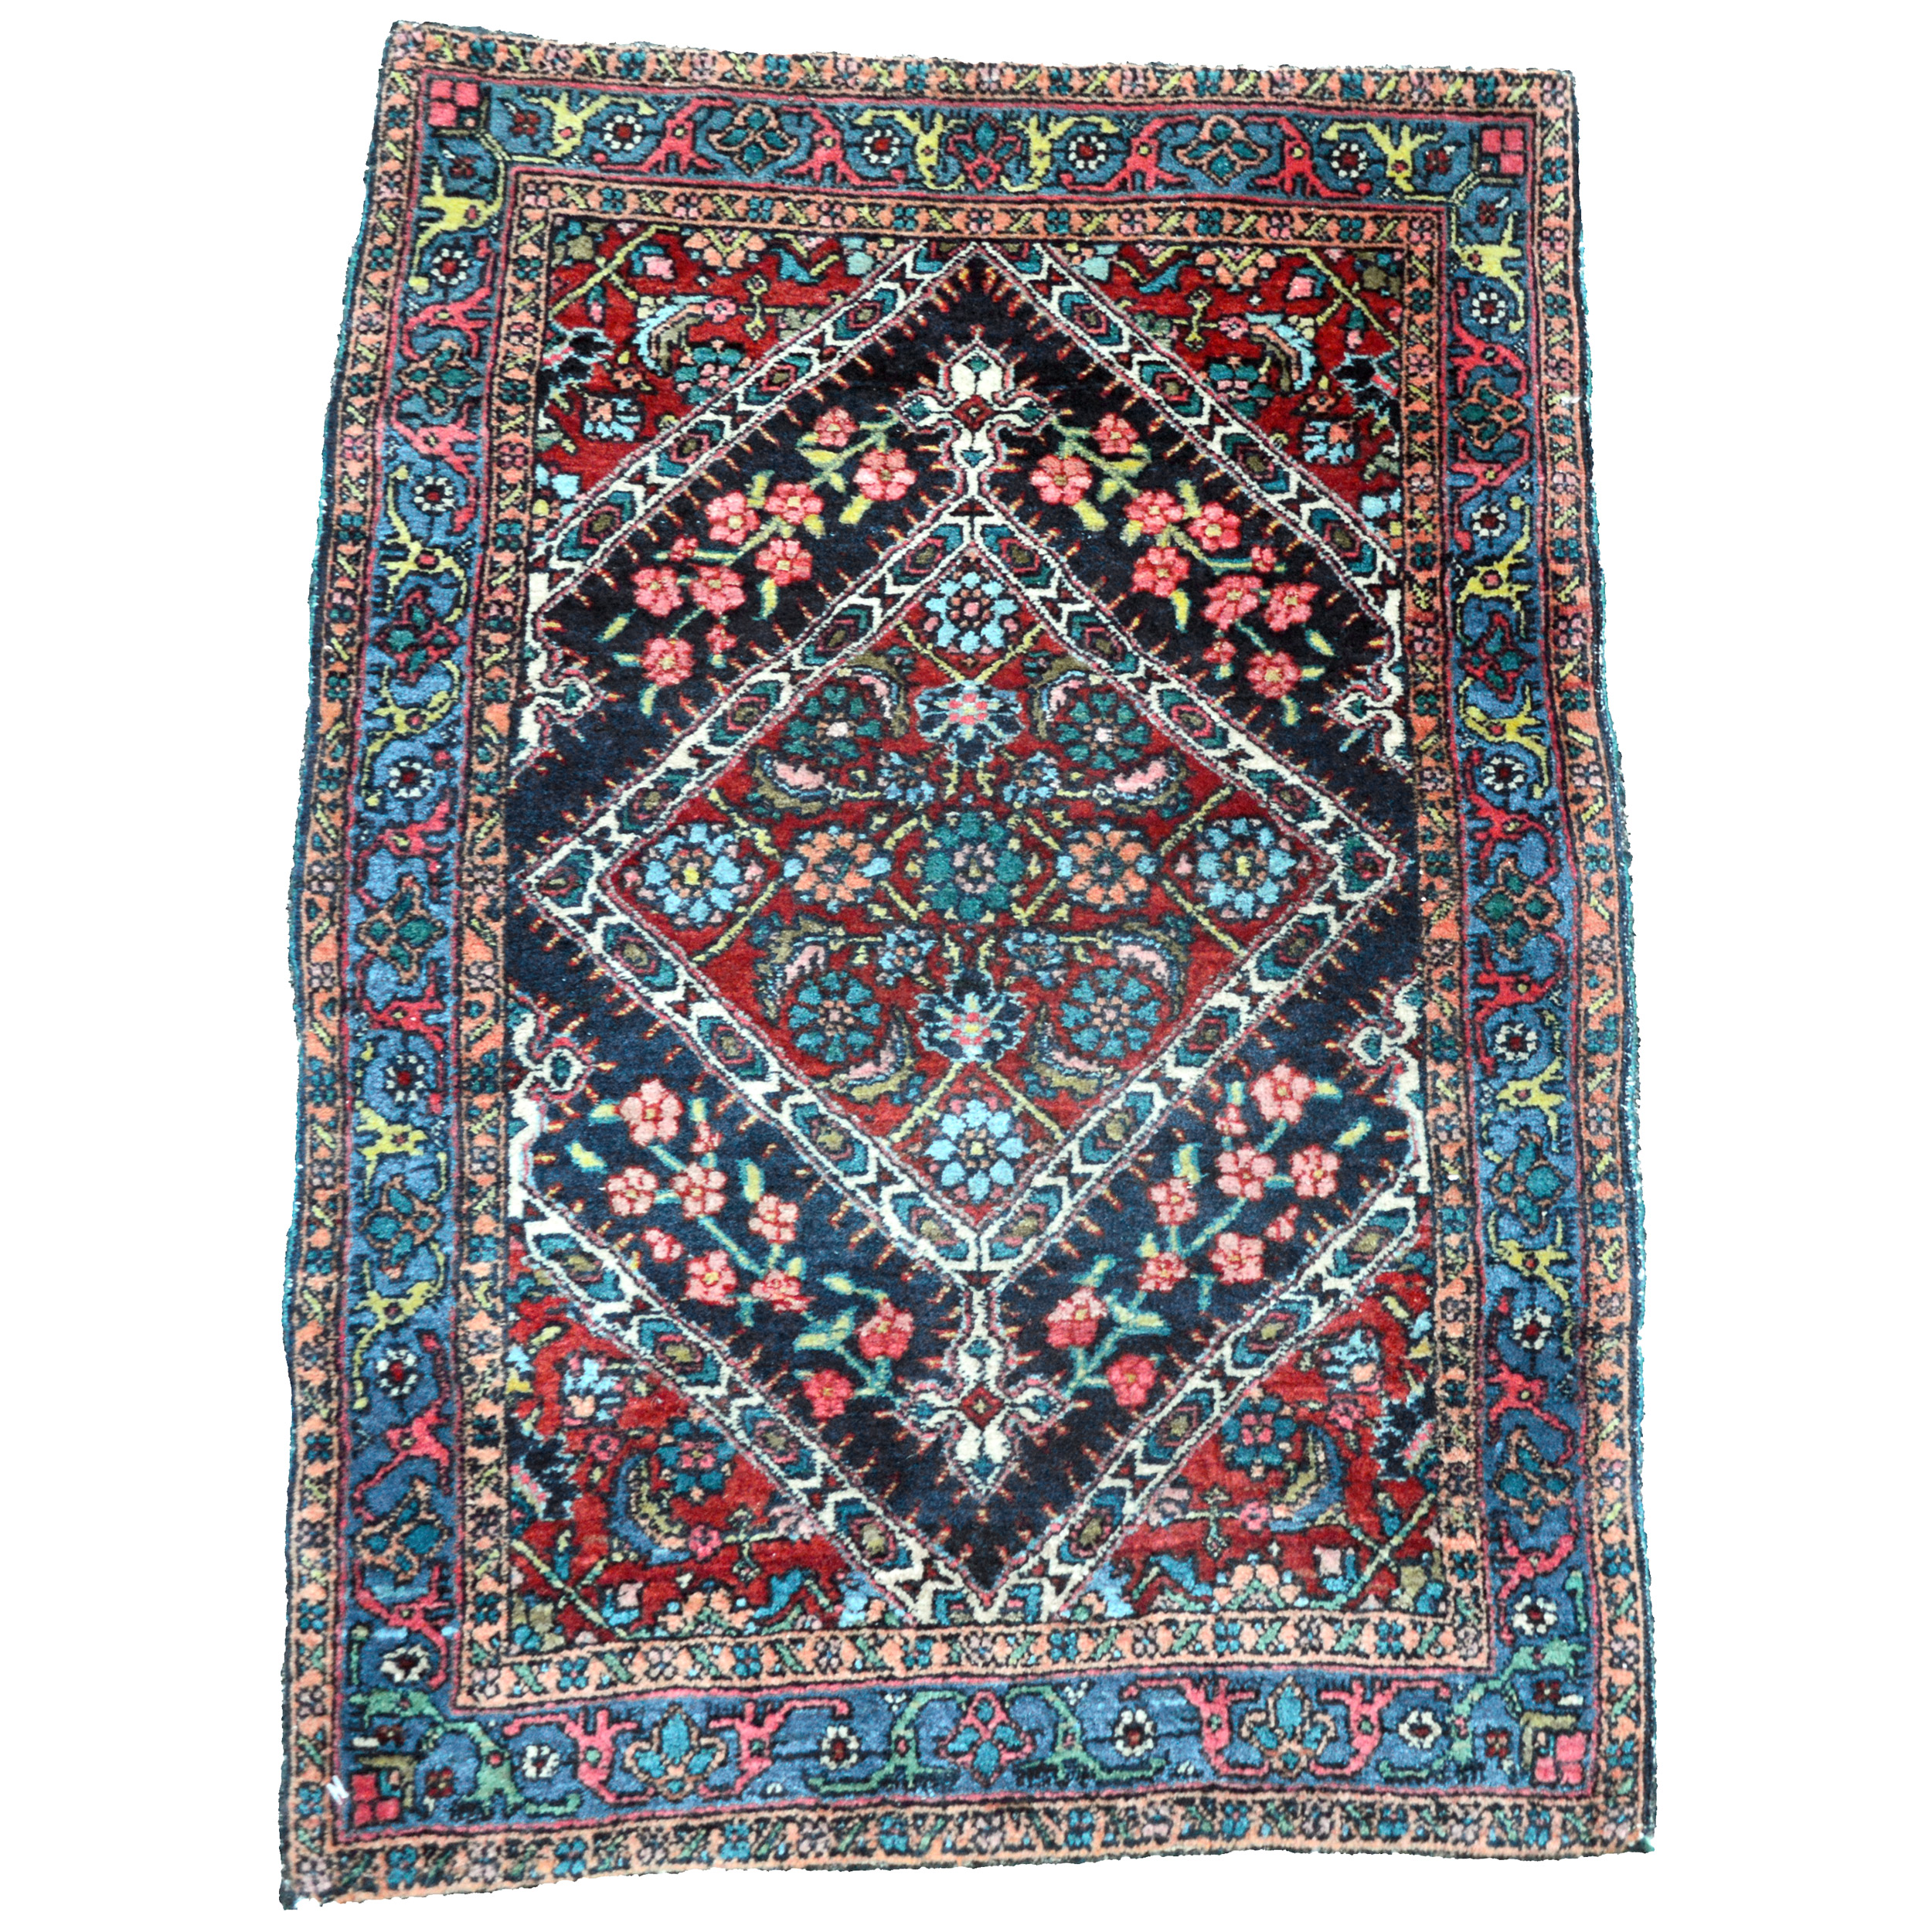 Antique Persian Bidjar Mat or Poshti, terms for small rugs approximately two feet by three feet in size. The navy blue field contains a red medallion and is framed by a deep sky blue border. Northwest Persia, circa 1915. Douglas Stock Gallery, antique Persian rugs Boston,MA area, New England